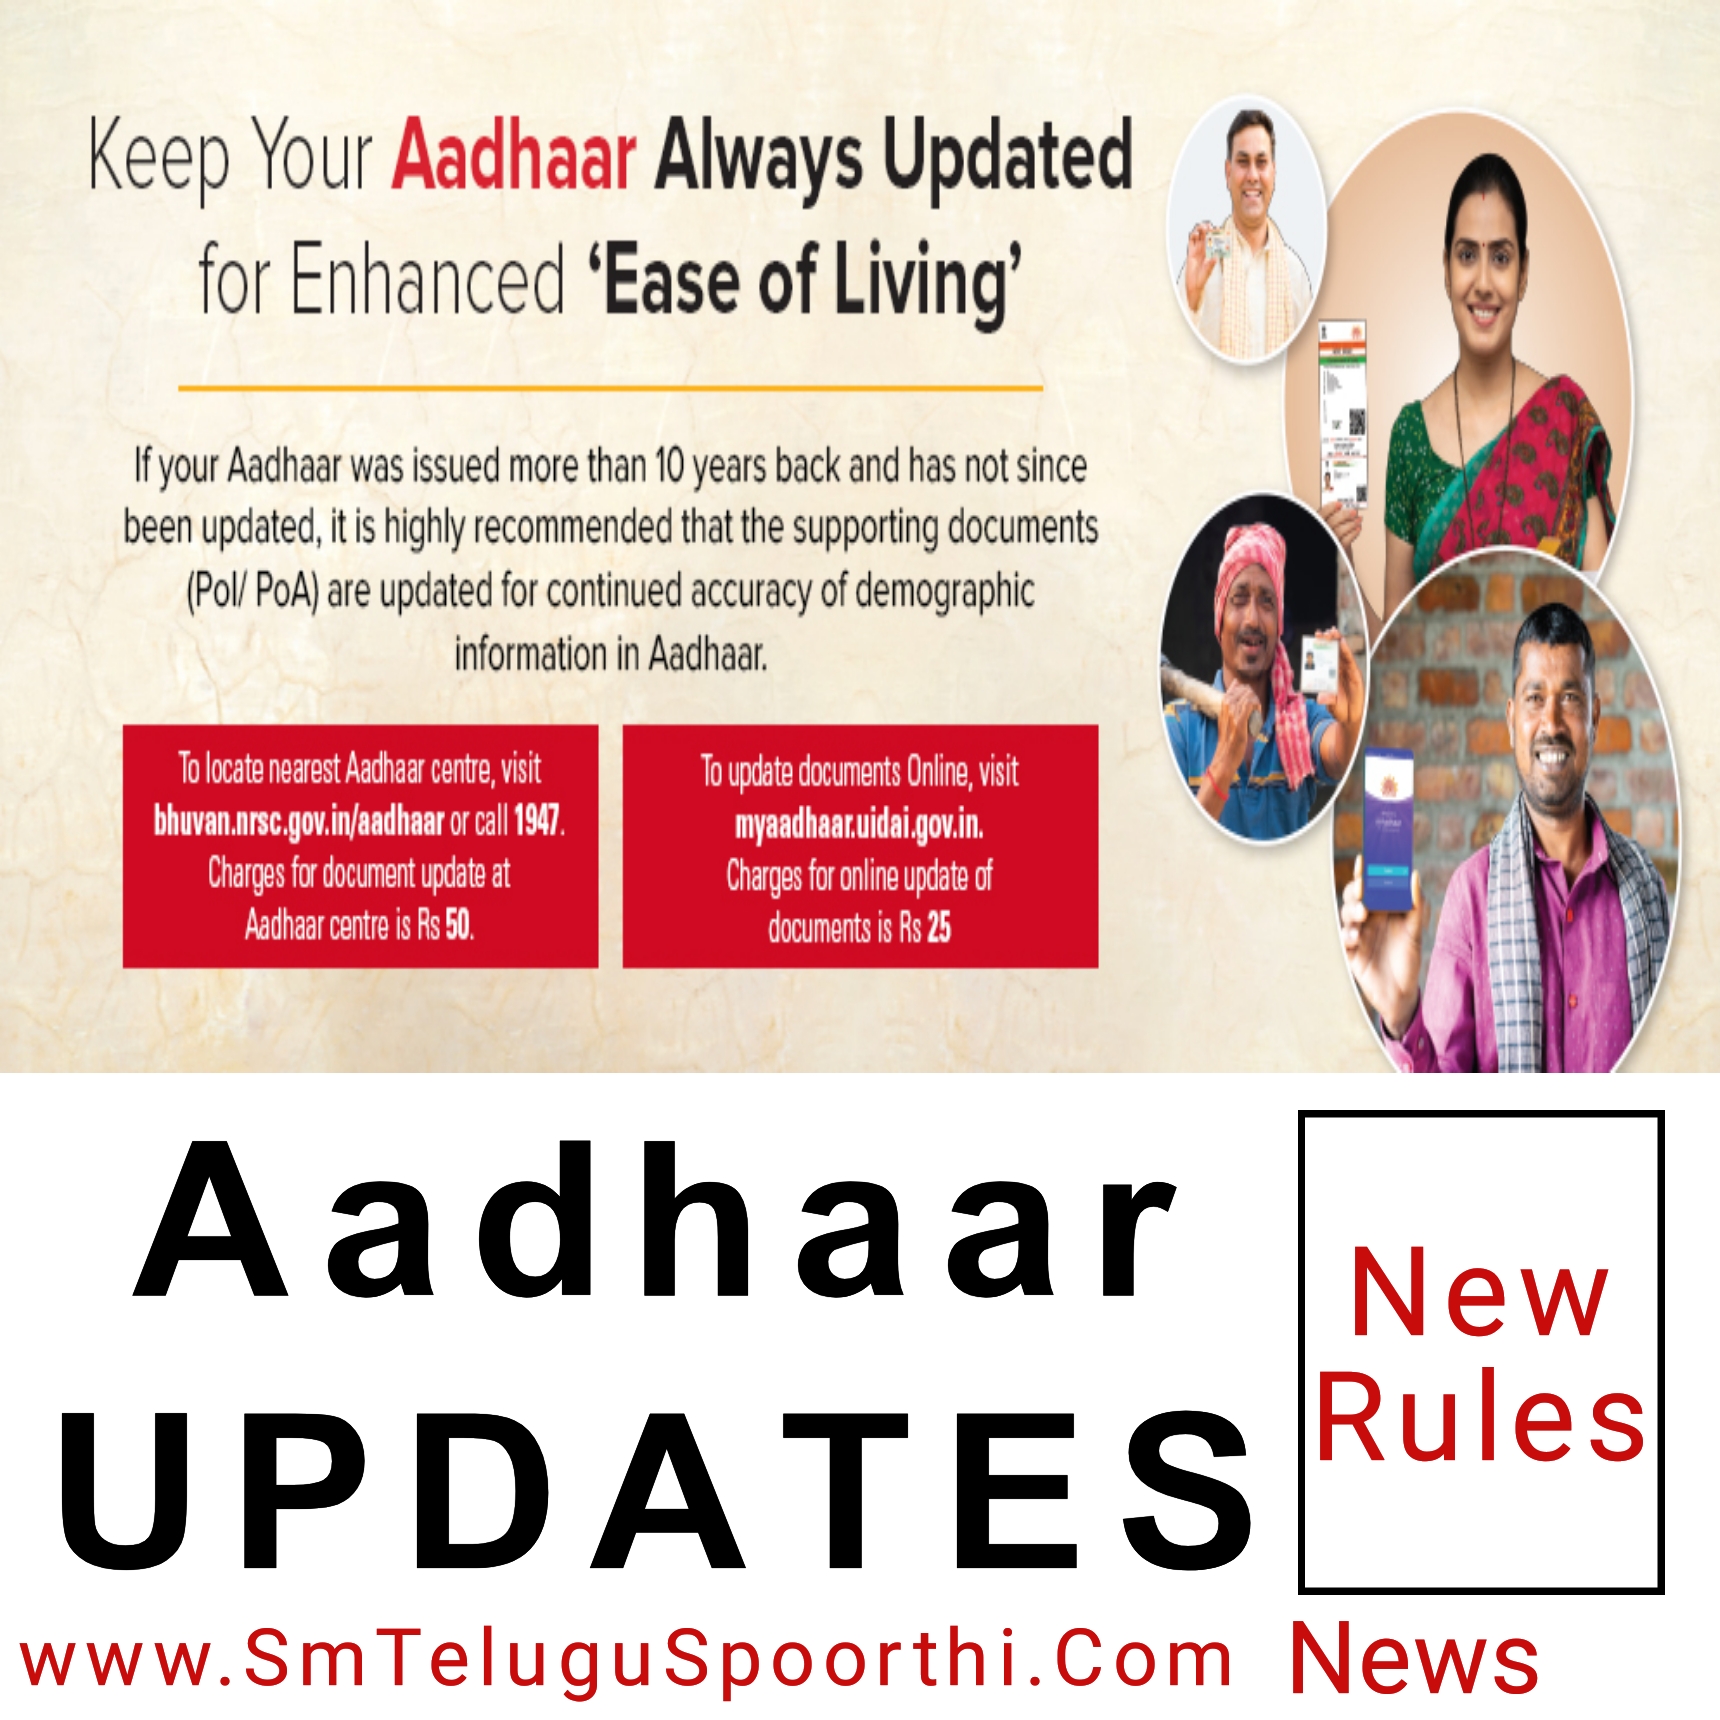 Updating AADHAR? New Rules